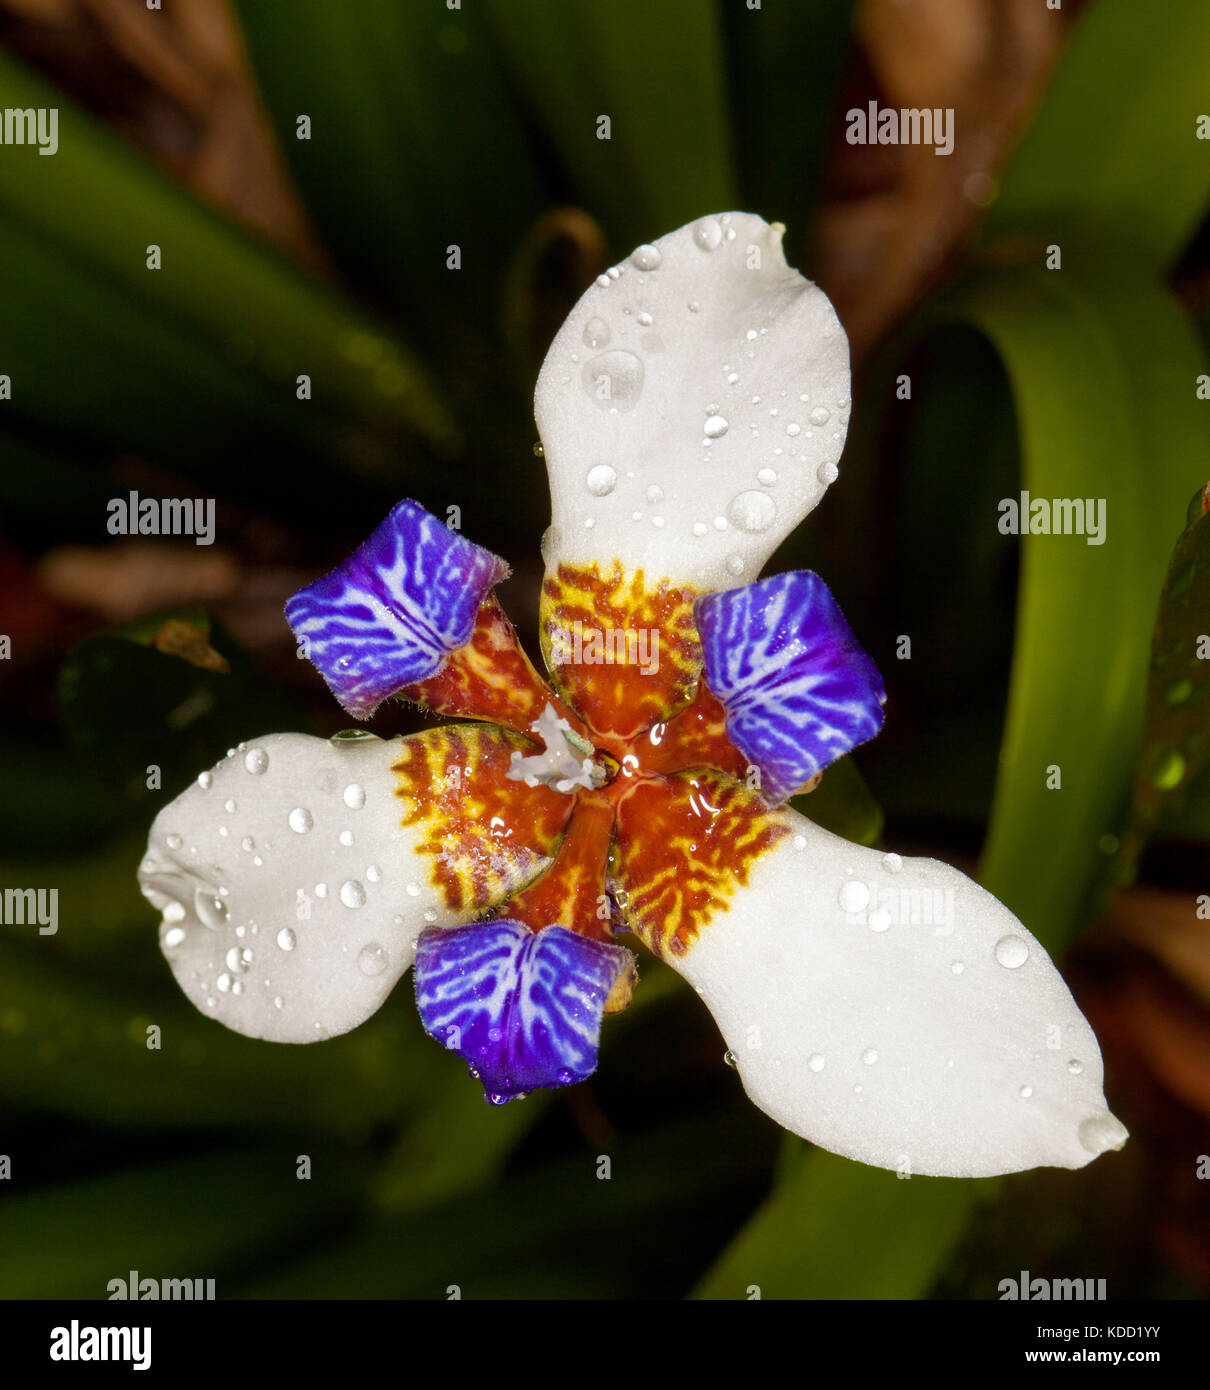 Unusual white and blue flower of Neomarica gracilis, walking iris, with raindrops on petals against background of dark green foliage Stock Photo